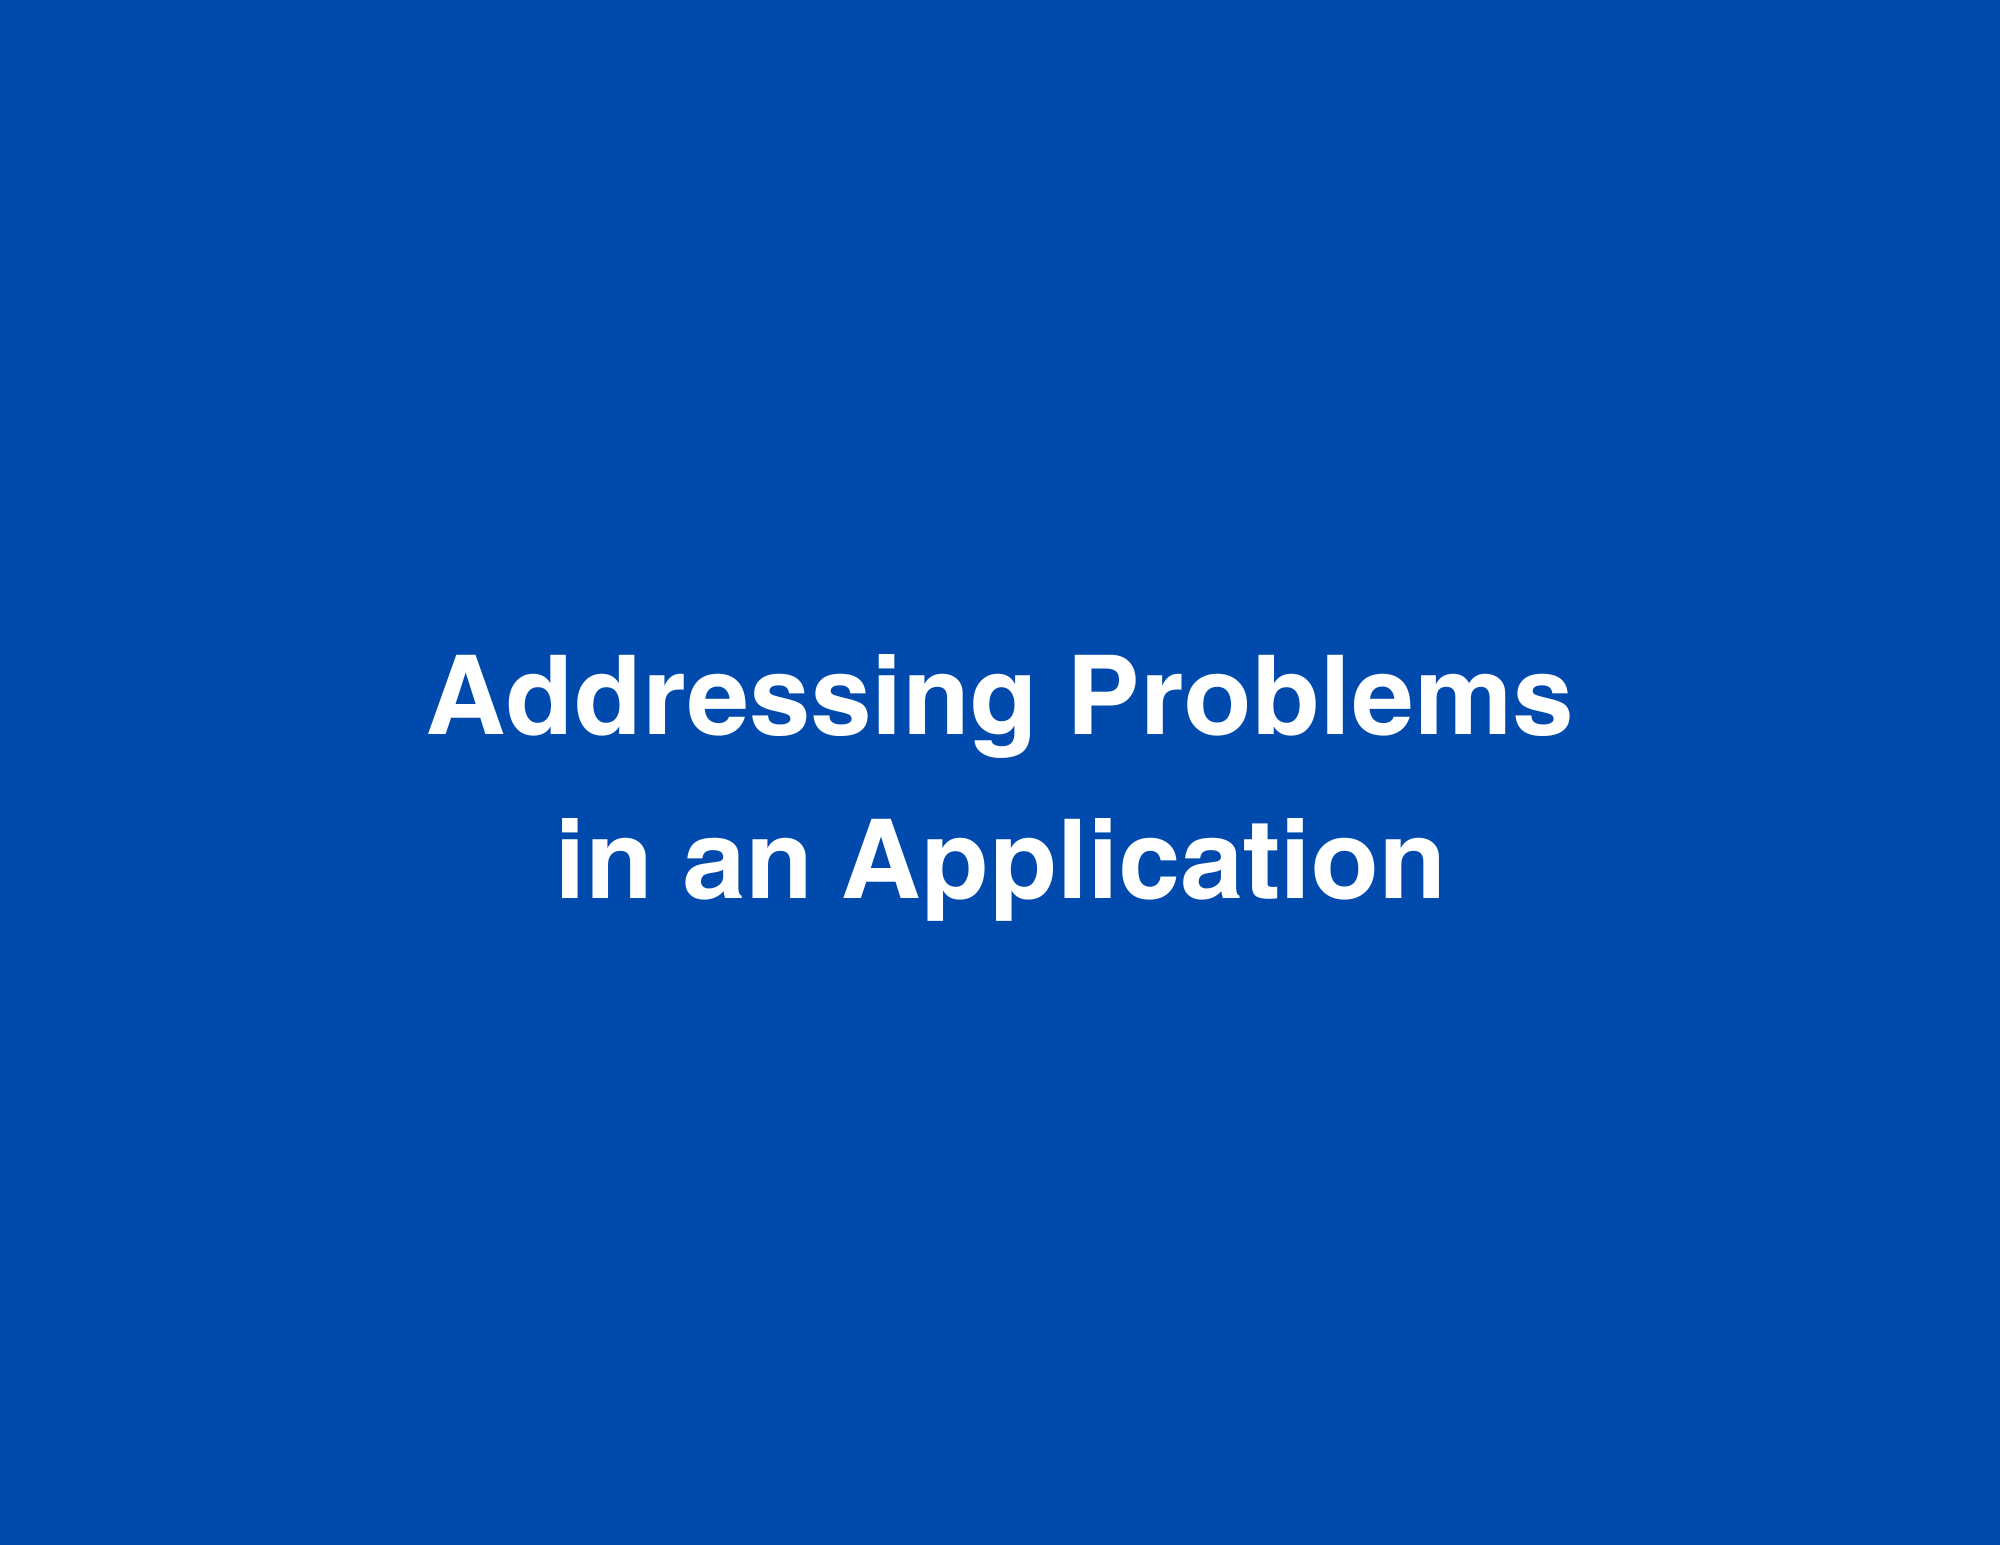 Addressing Problems in an Application